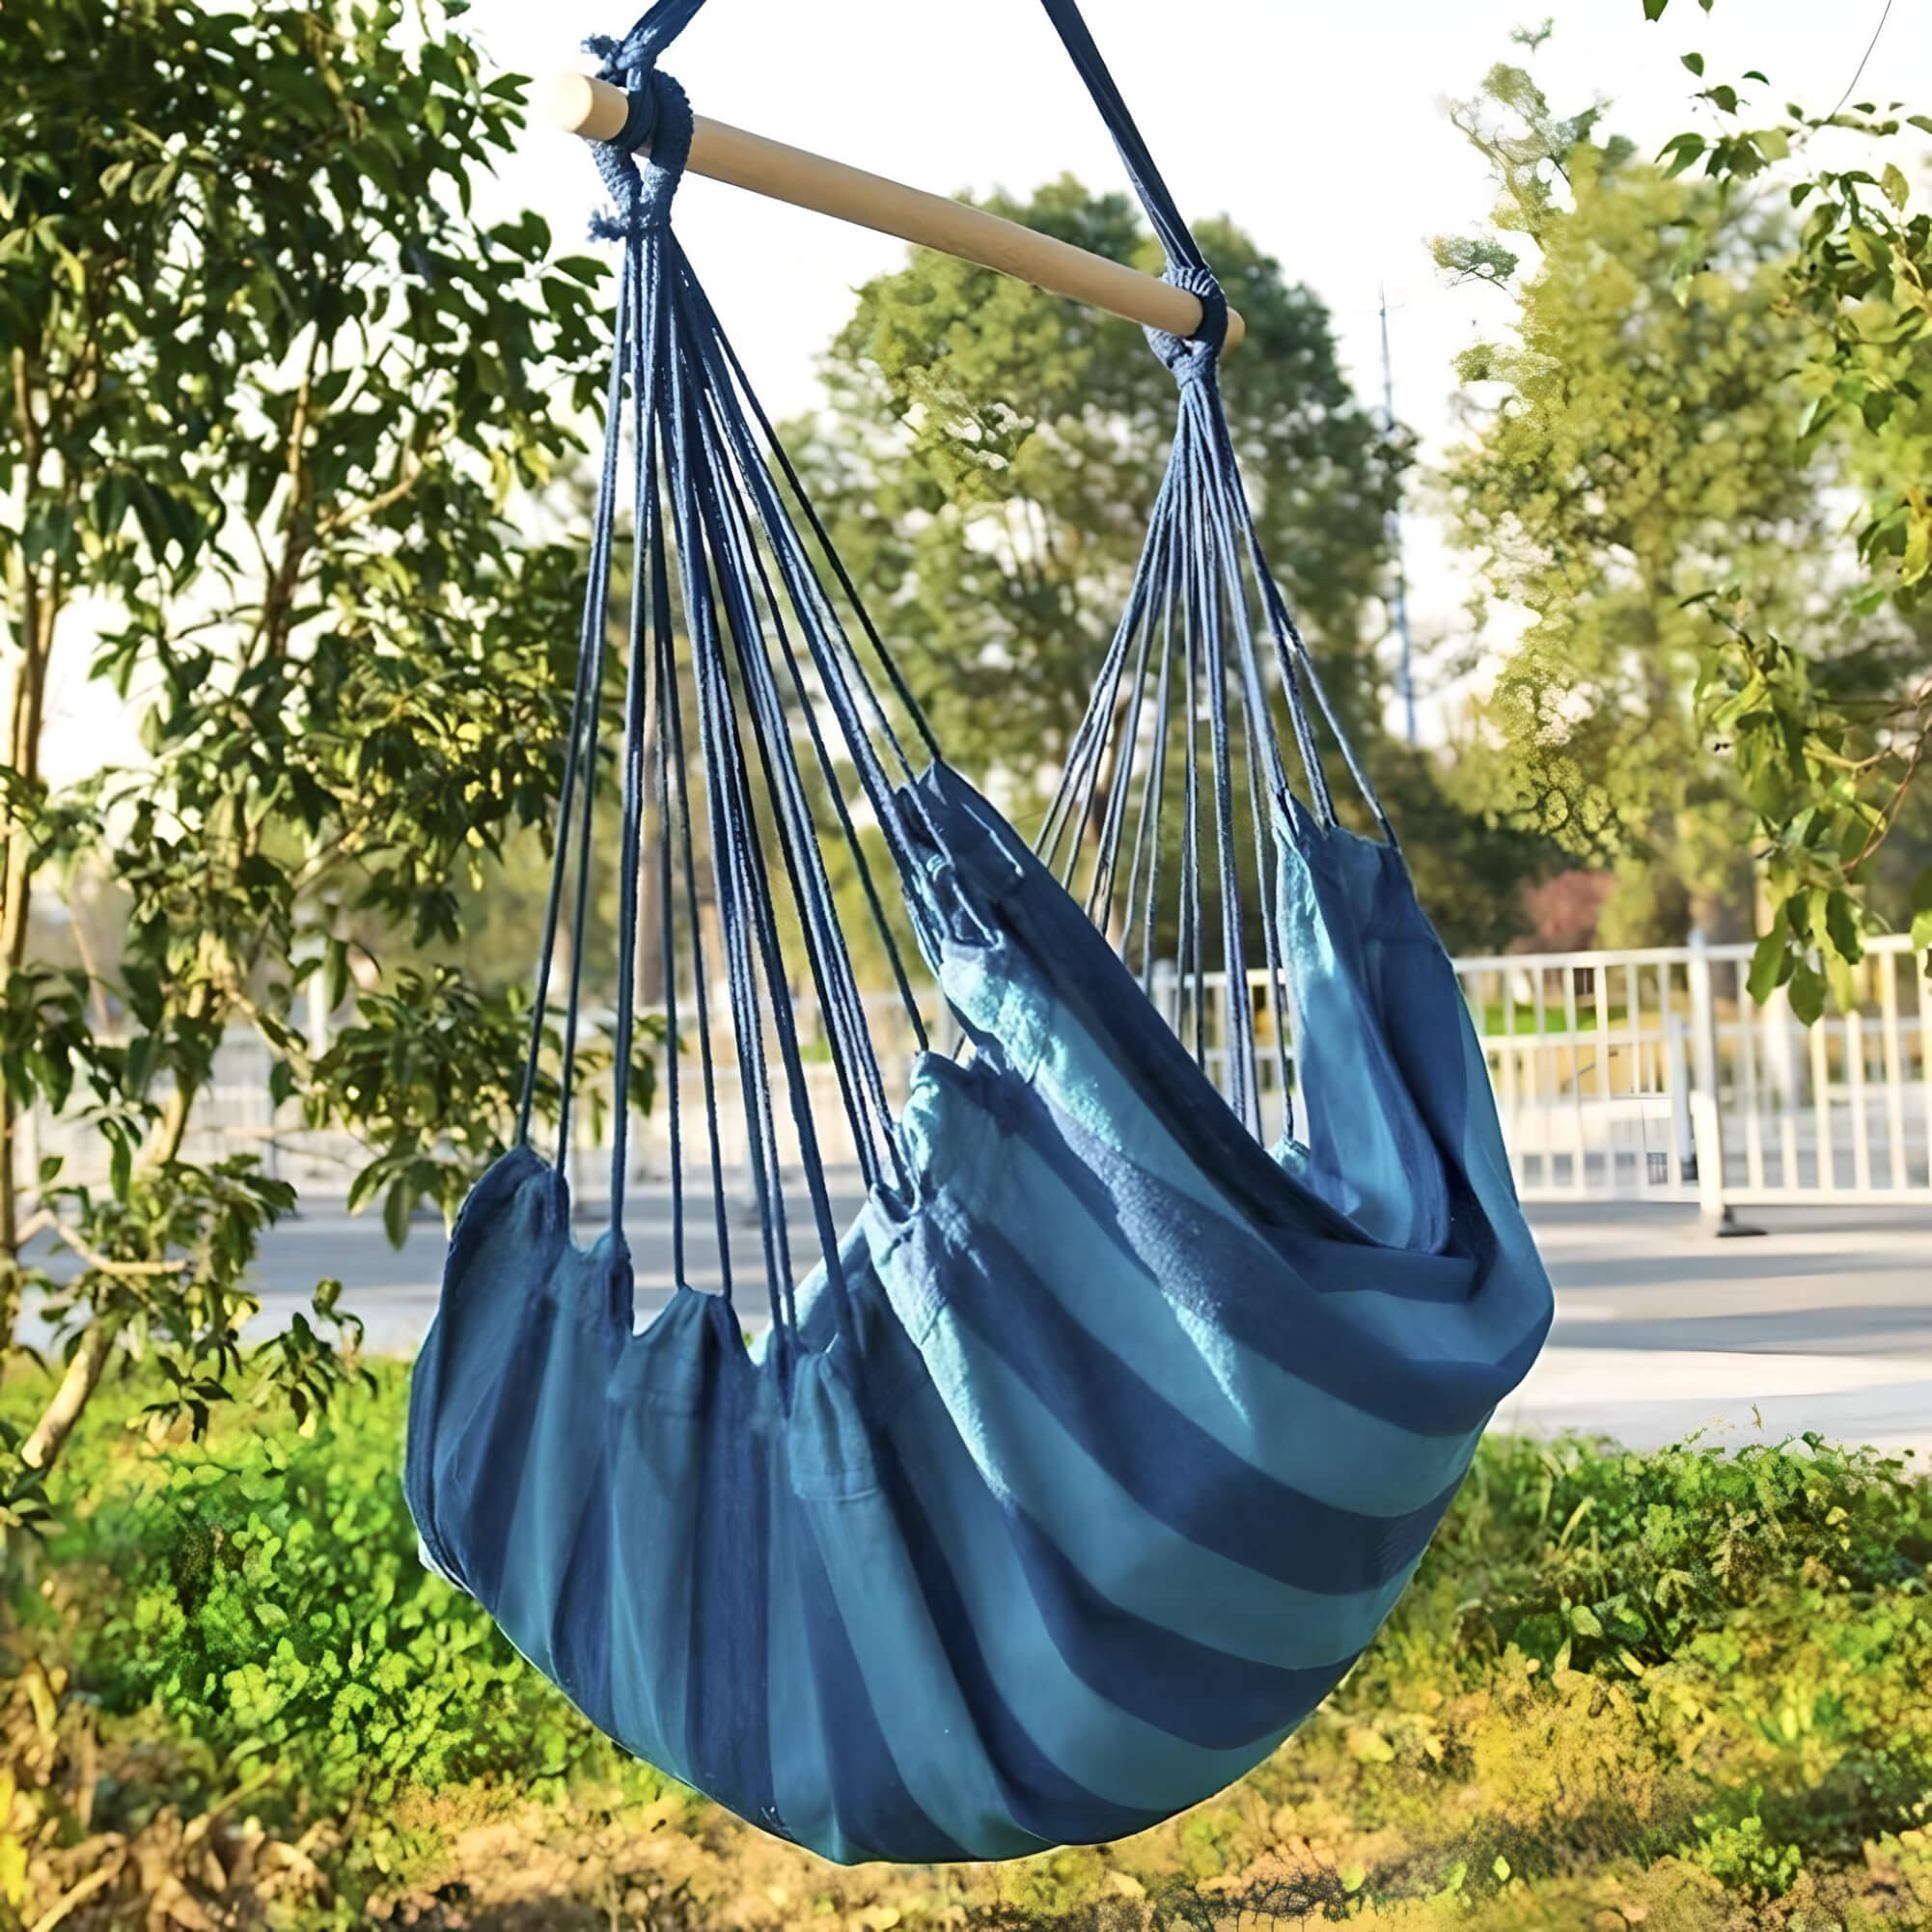 canvas-hammock-chair-hanging-in-outdoor